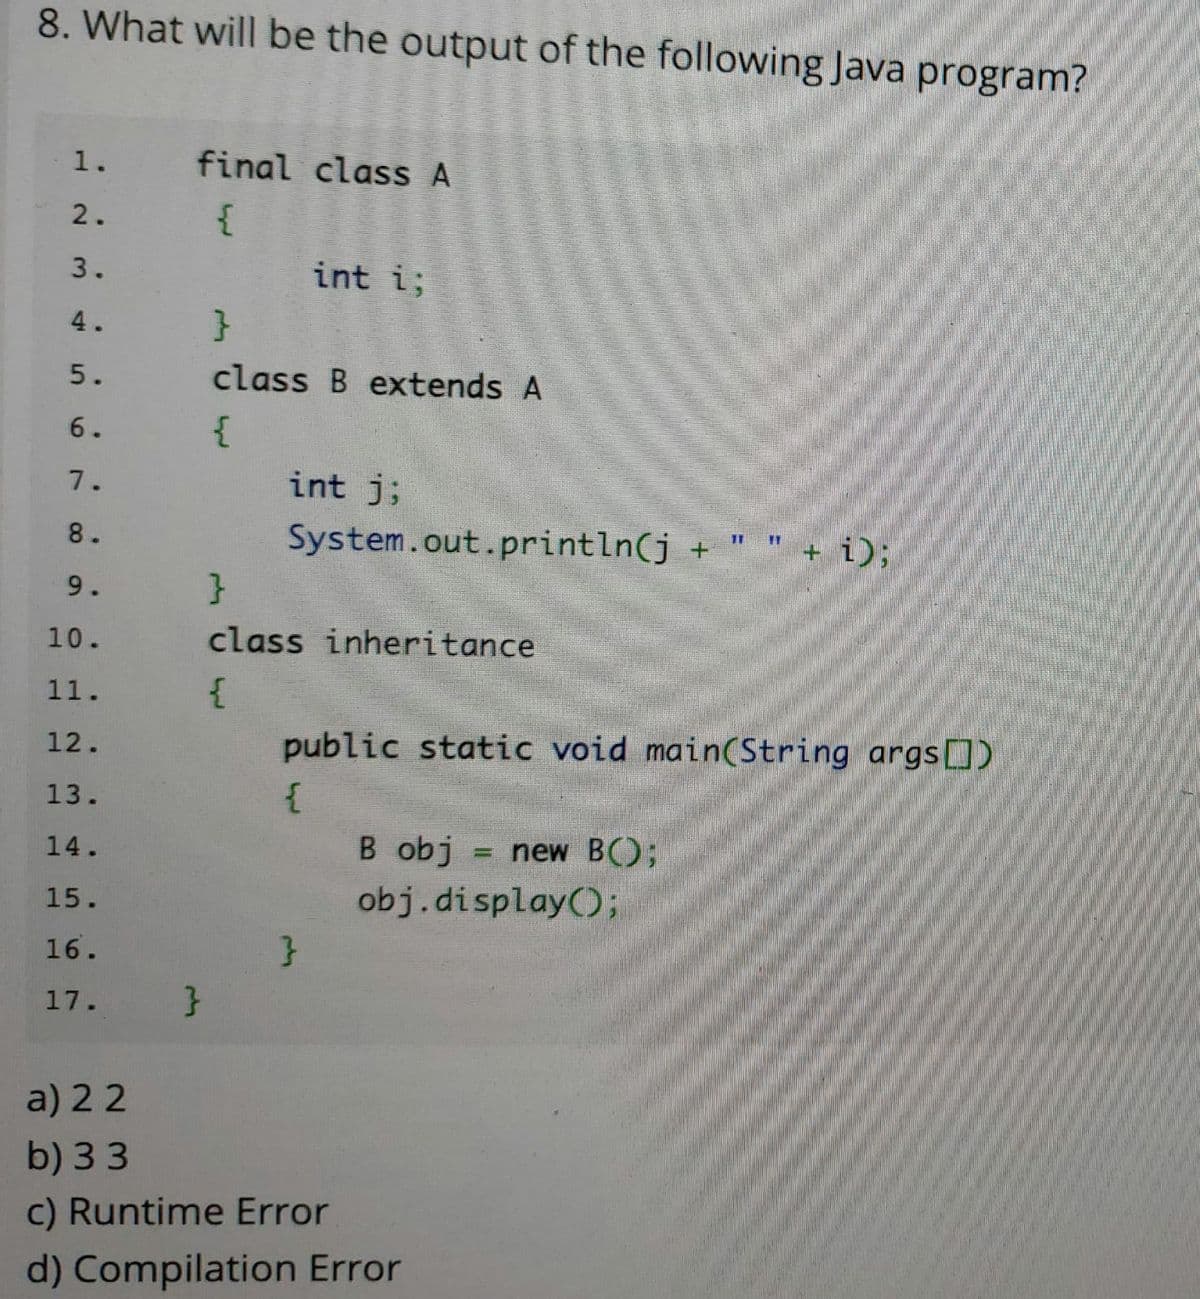 8. What will be the output of the following Java program?
final class A
2.
3.
int i;
4.
}
5.
class B extends A
6.
{
7.
int j;
8.
System.out.println(j +
+ i);
9.
}
10.
class inheritance
11.
12.
public static void main(String args[)
13.
14.
B obj
new B();
15.
obj.display();
16.
}
17.
a) 22
b) 33
c) Runtime Error
d) Compilation Error
1.
